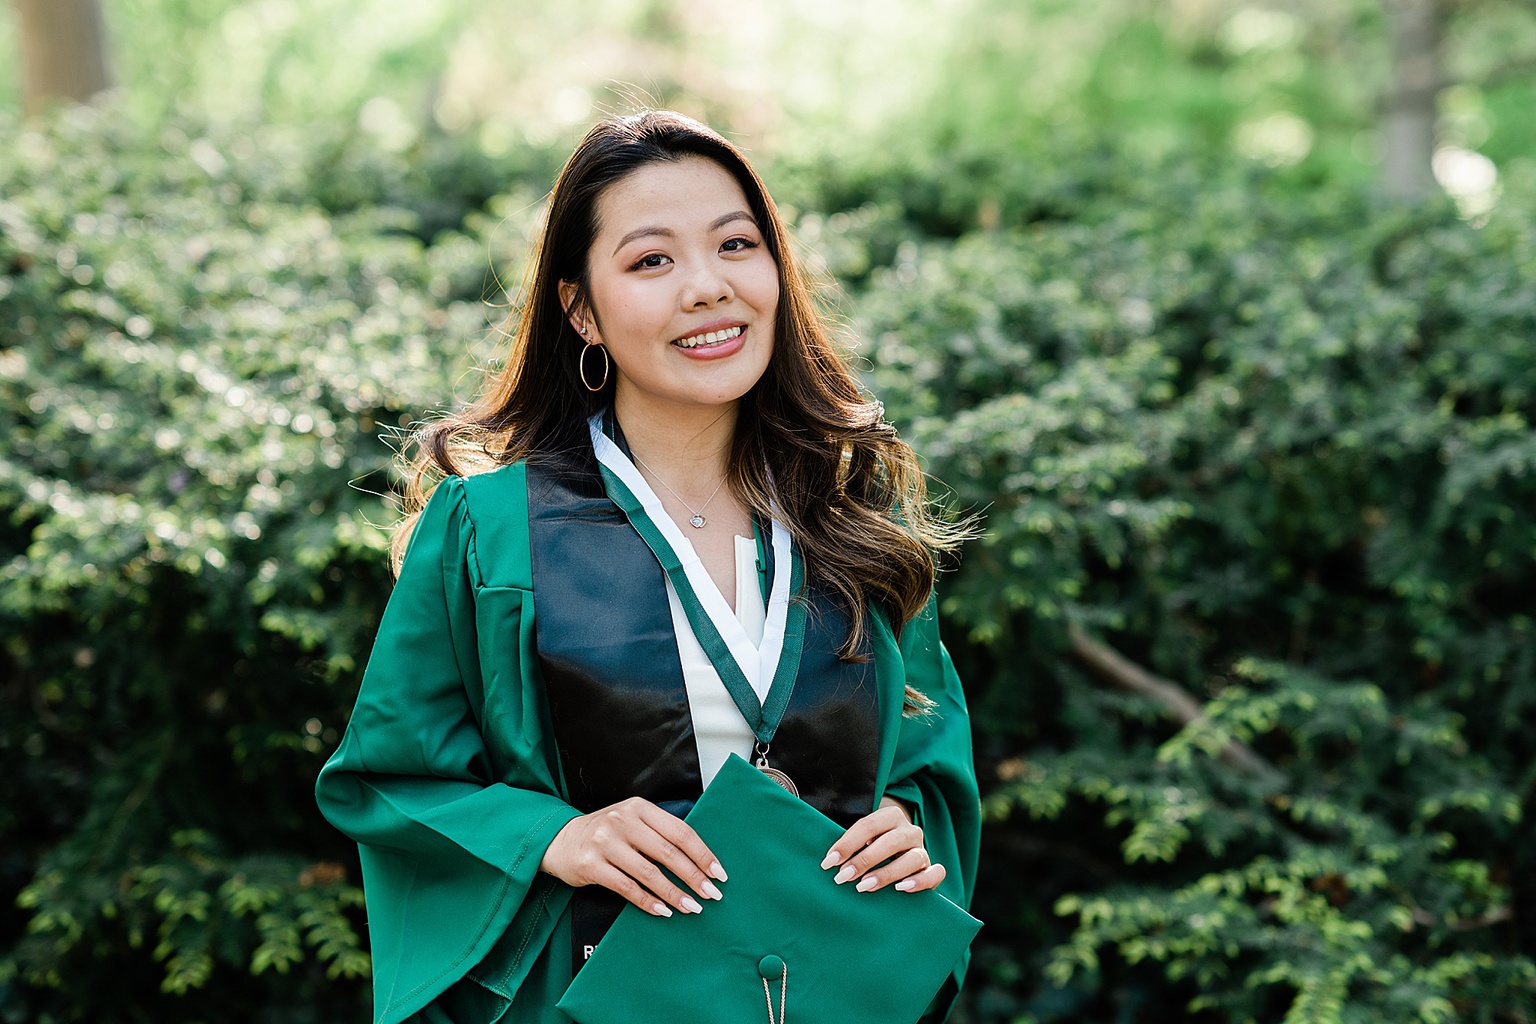 Michigan State Senior grad photoshoot on MSU's campus, close up photo of a woman in her graduation cap and gown, by Allie Siarto & Co., East Lansing photographers